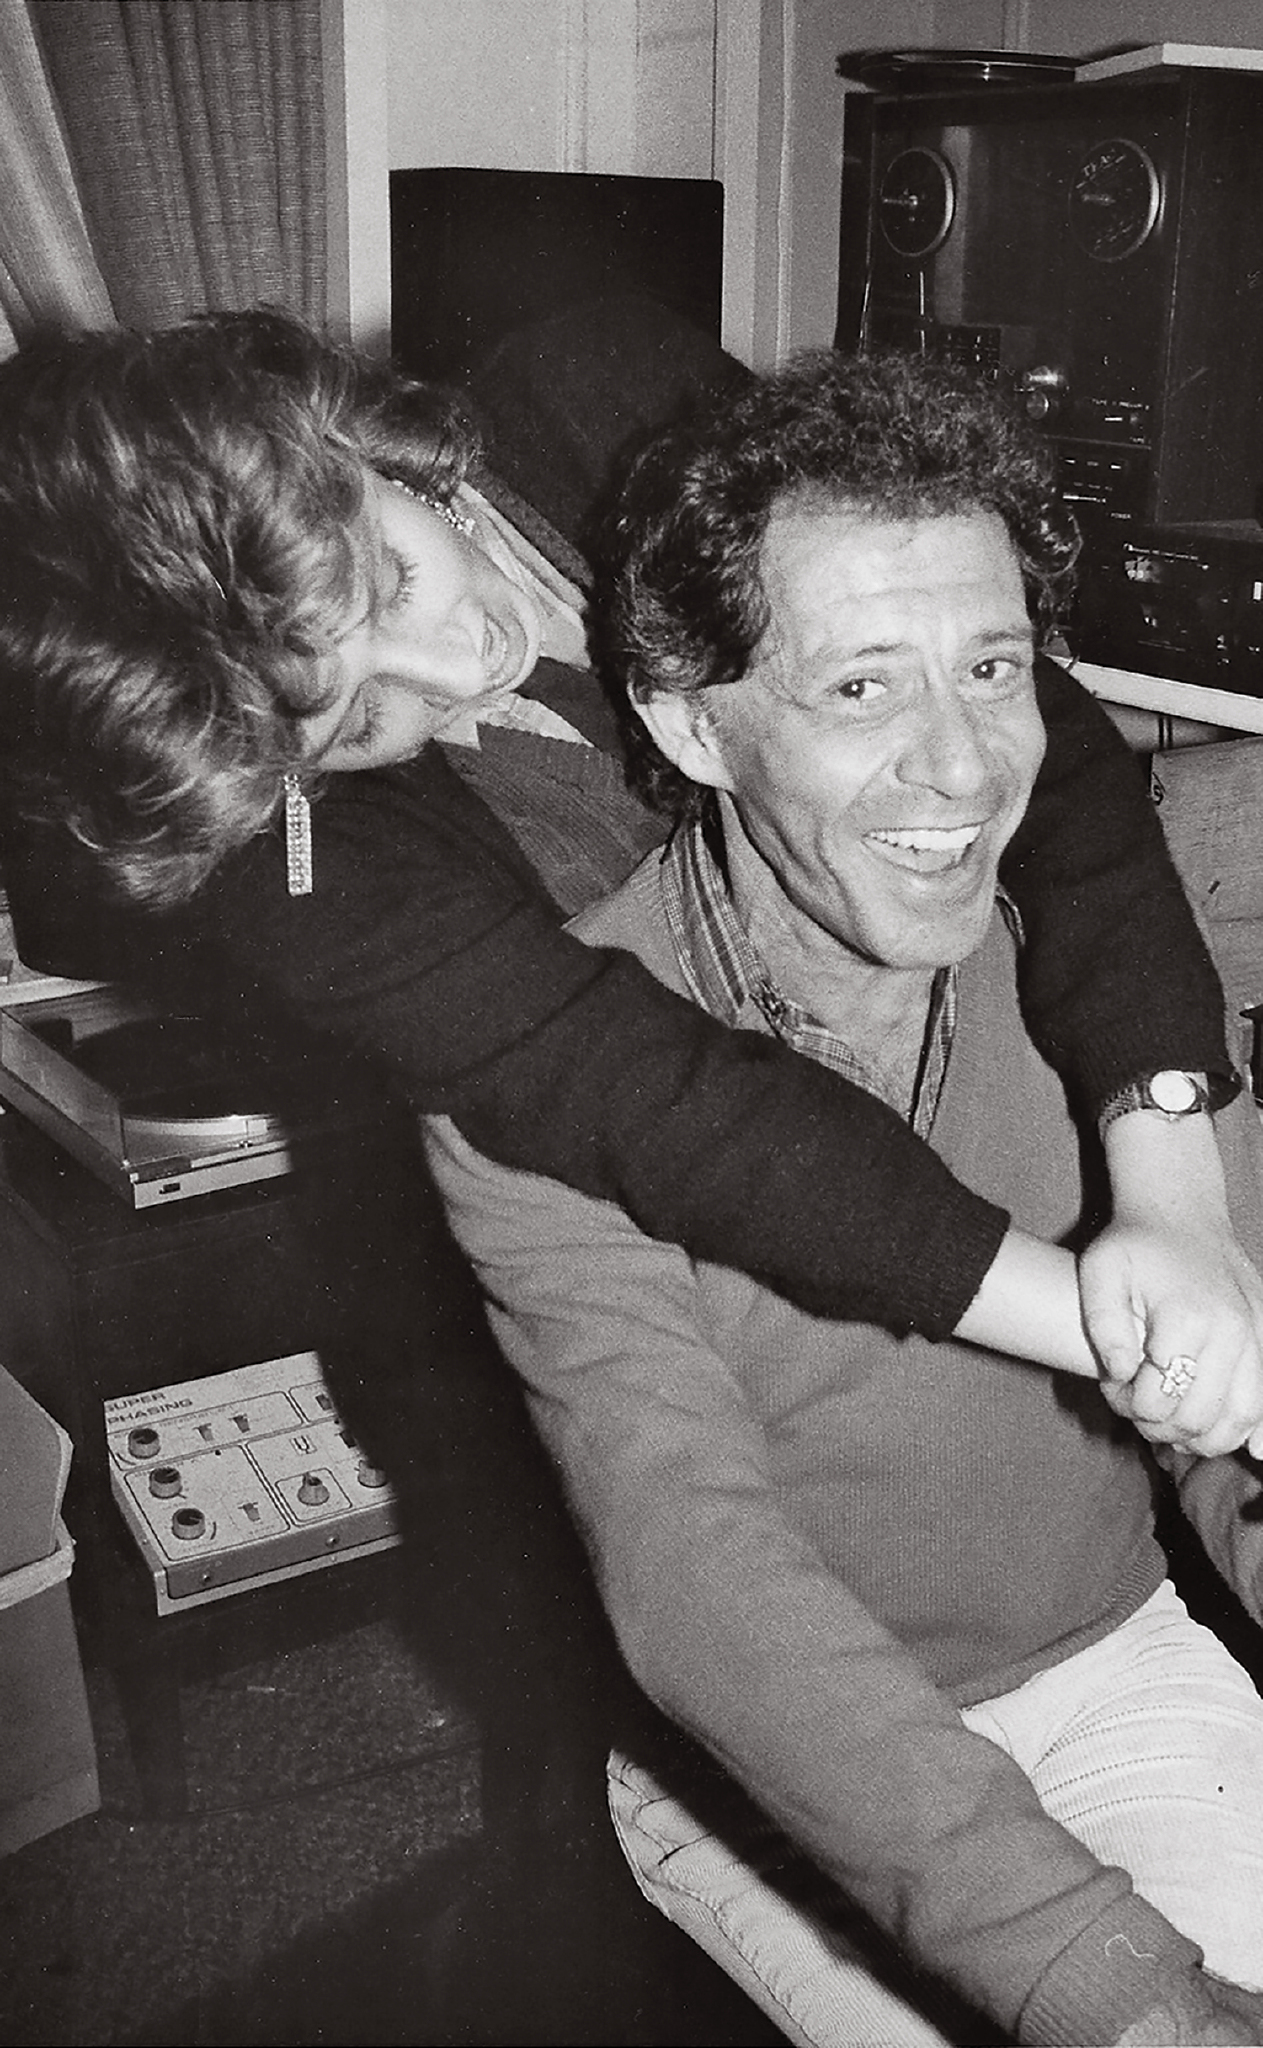 PHOTO: Joely Fisher hugs her father, Eddie Fisher, in this undated family photo.